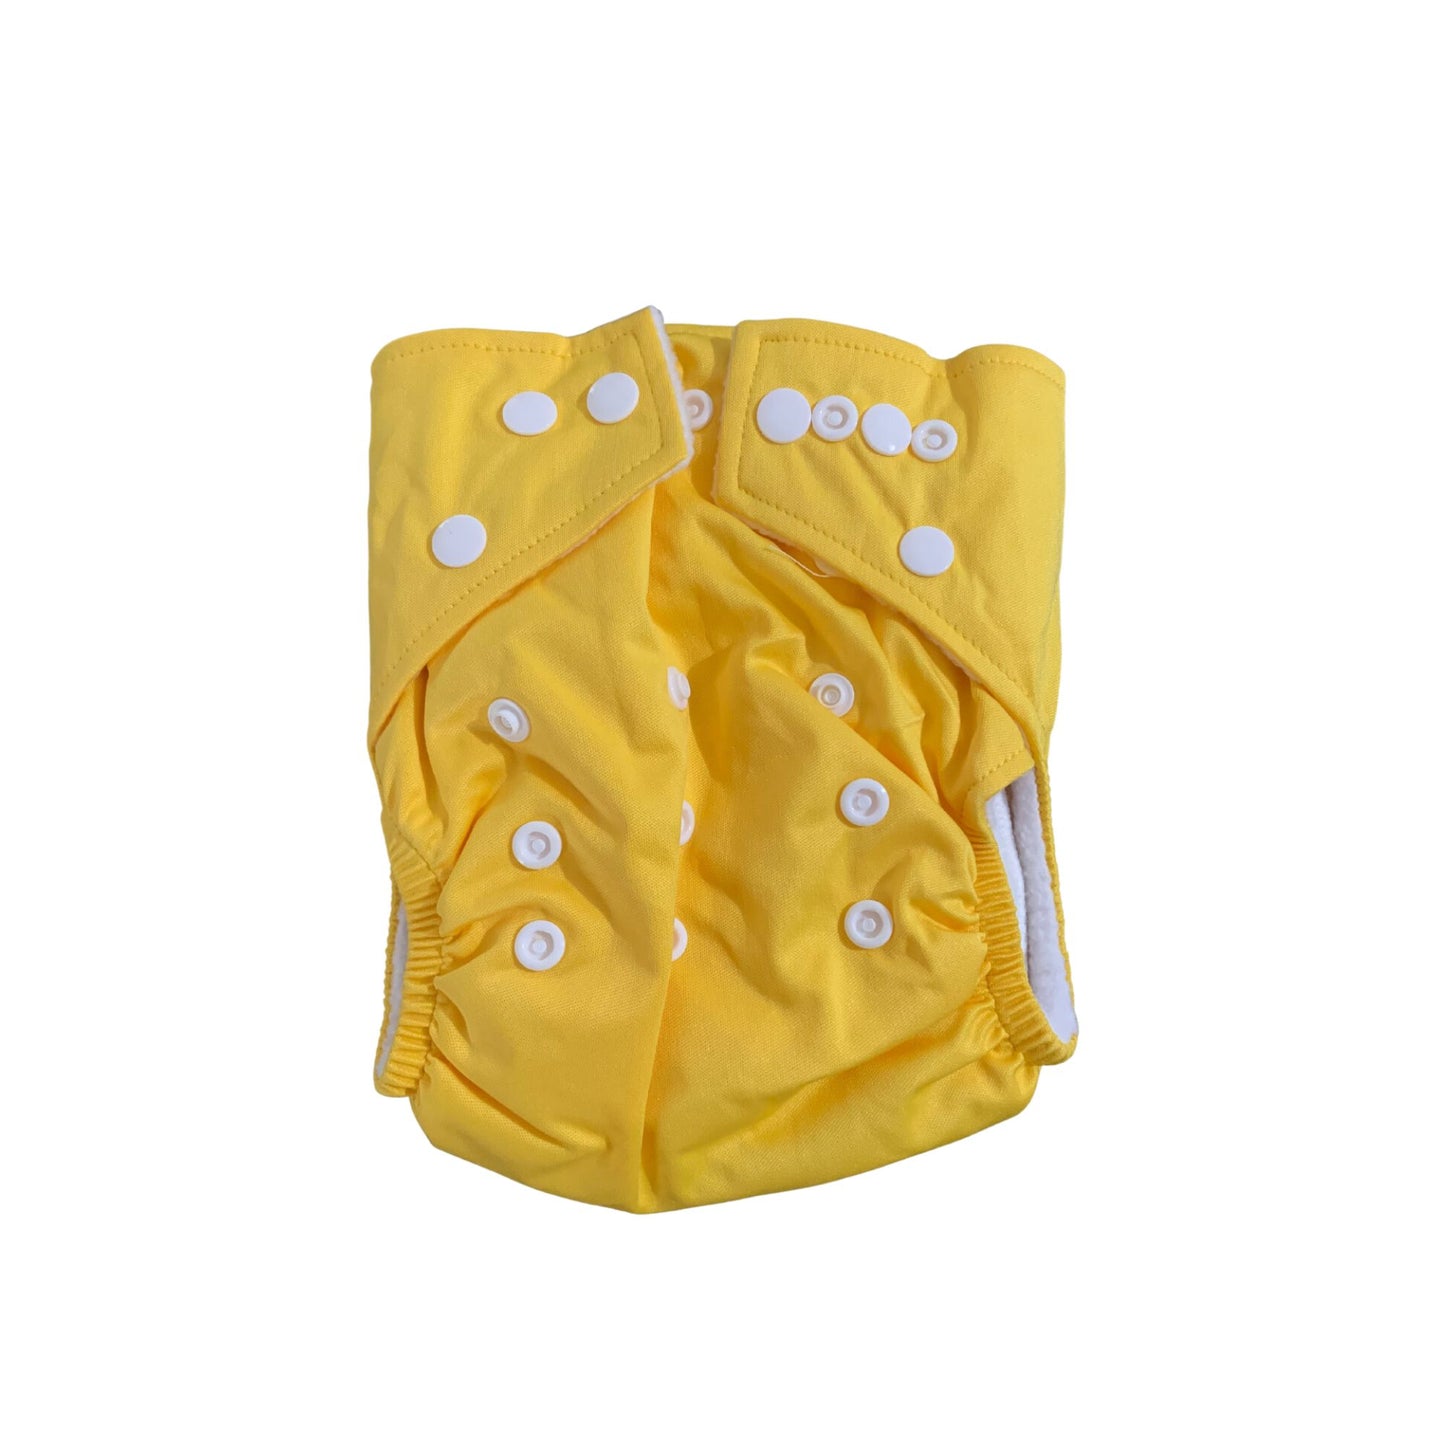 Next9 Cloth Diaper With Microfiber Insert Included